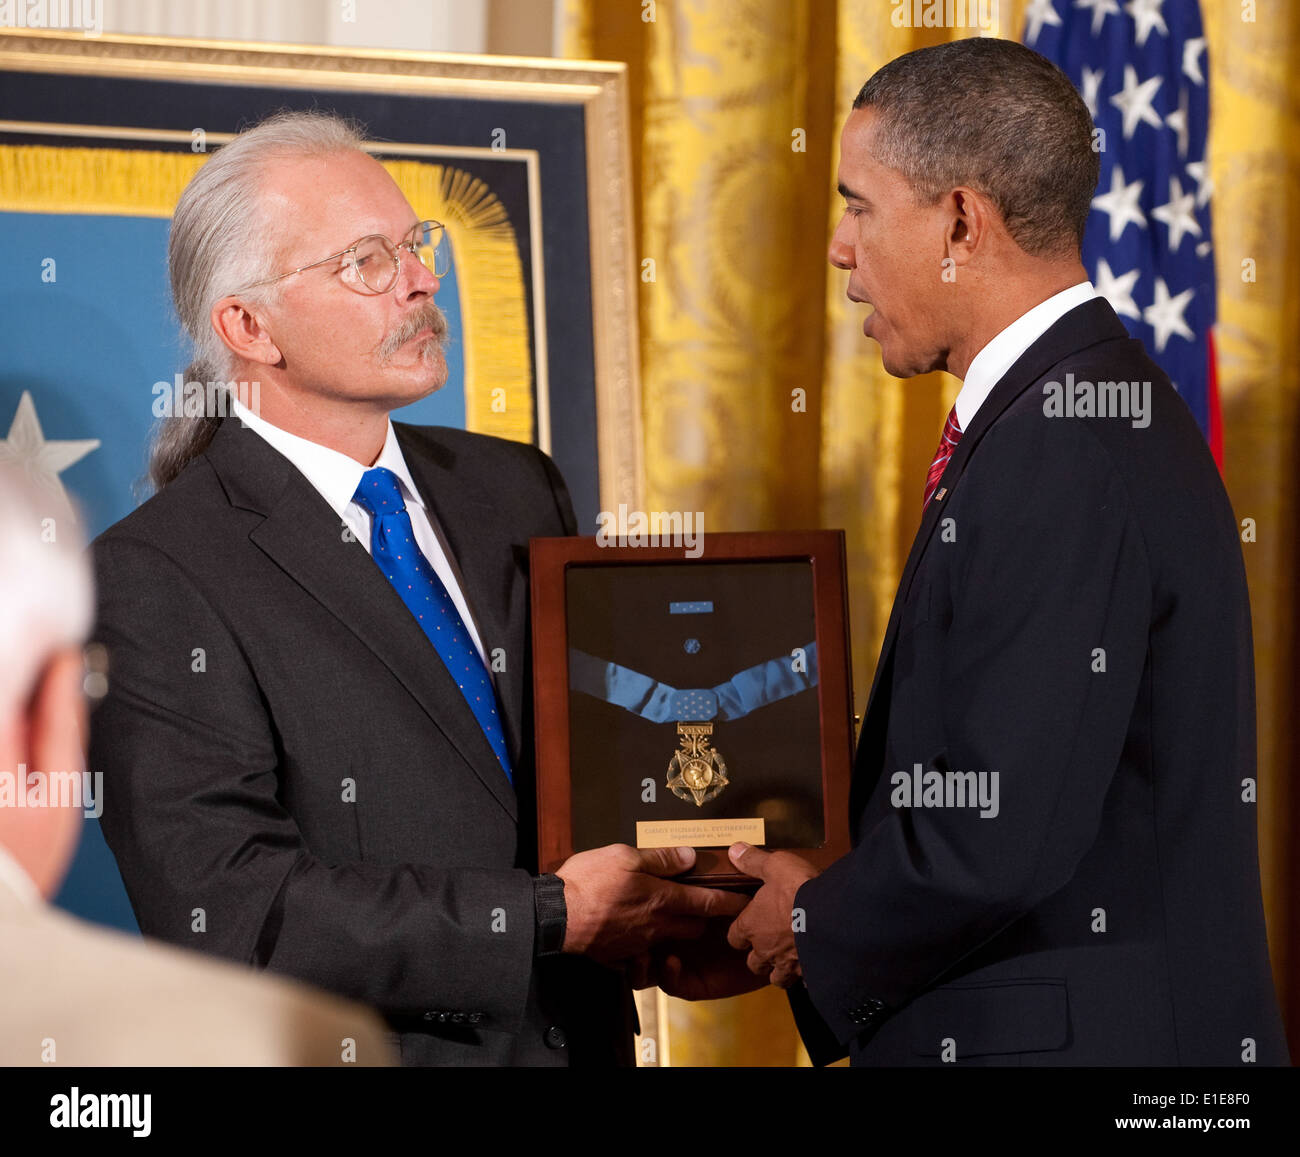 President Barack Obama, right, presents a Medal of Honor award to Richard Etchberger, son of U.S. Air Force Chief Master Sgt. R Stock Photo